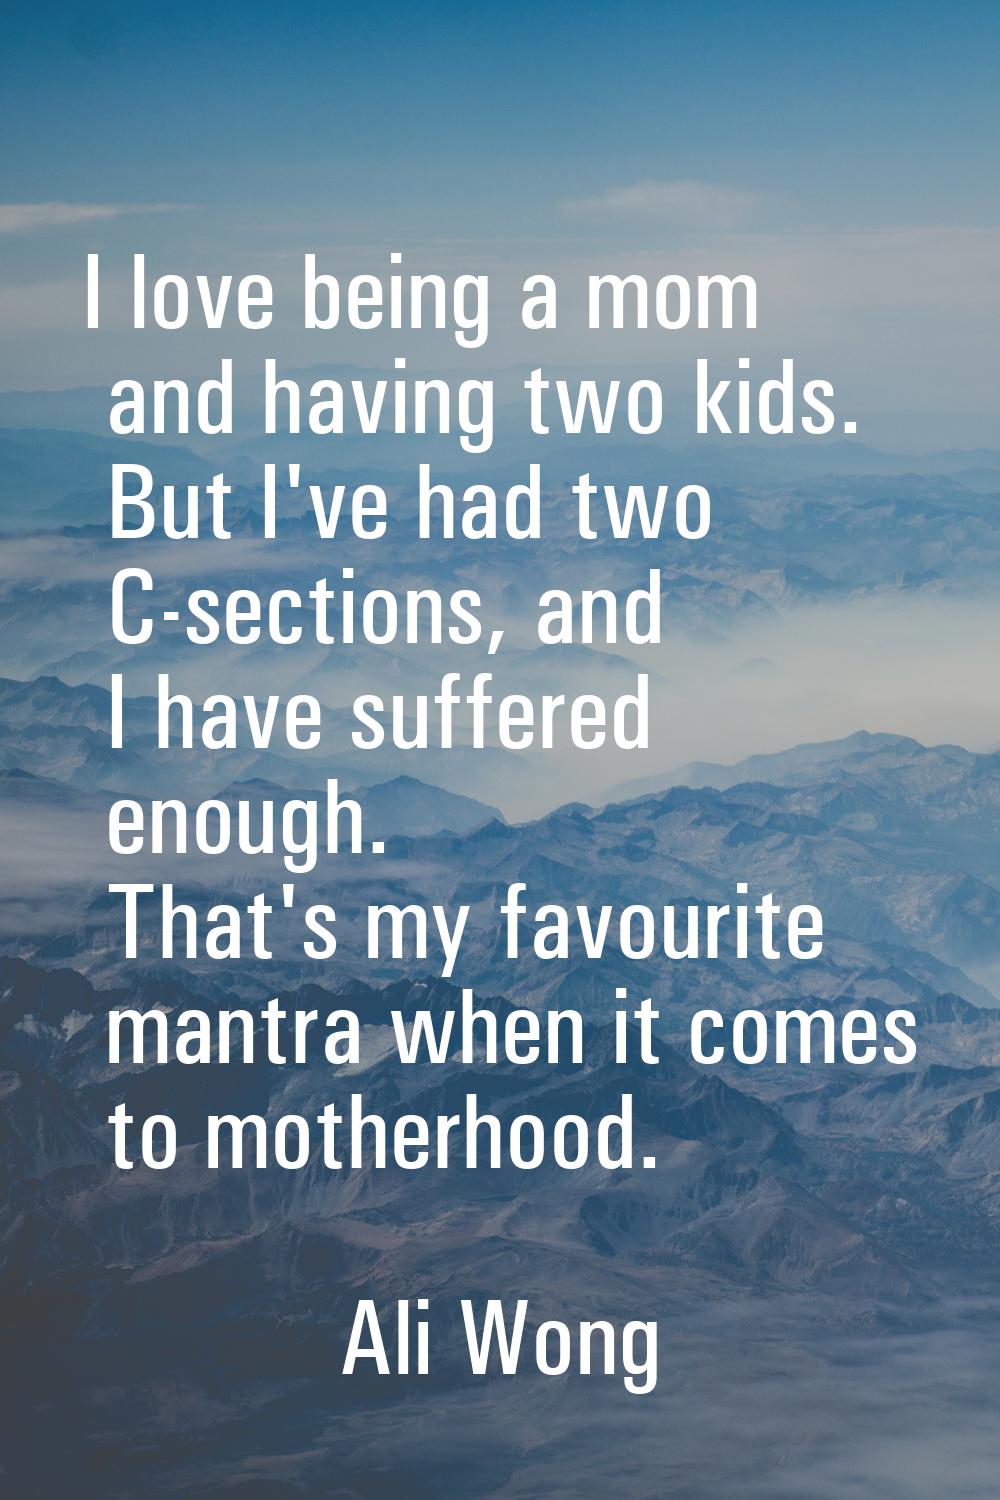 I love being a mom and having two kids. But I've had two C-sections, and I have suffered enough. Th